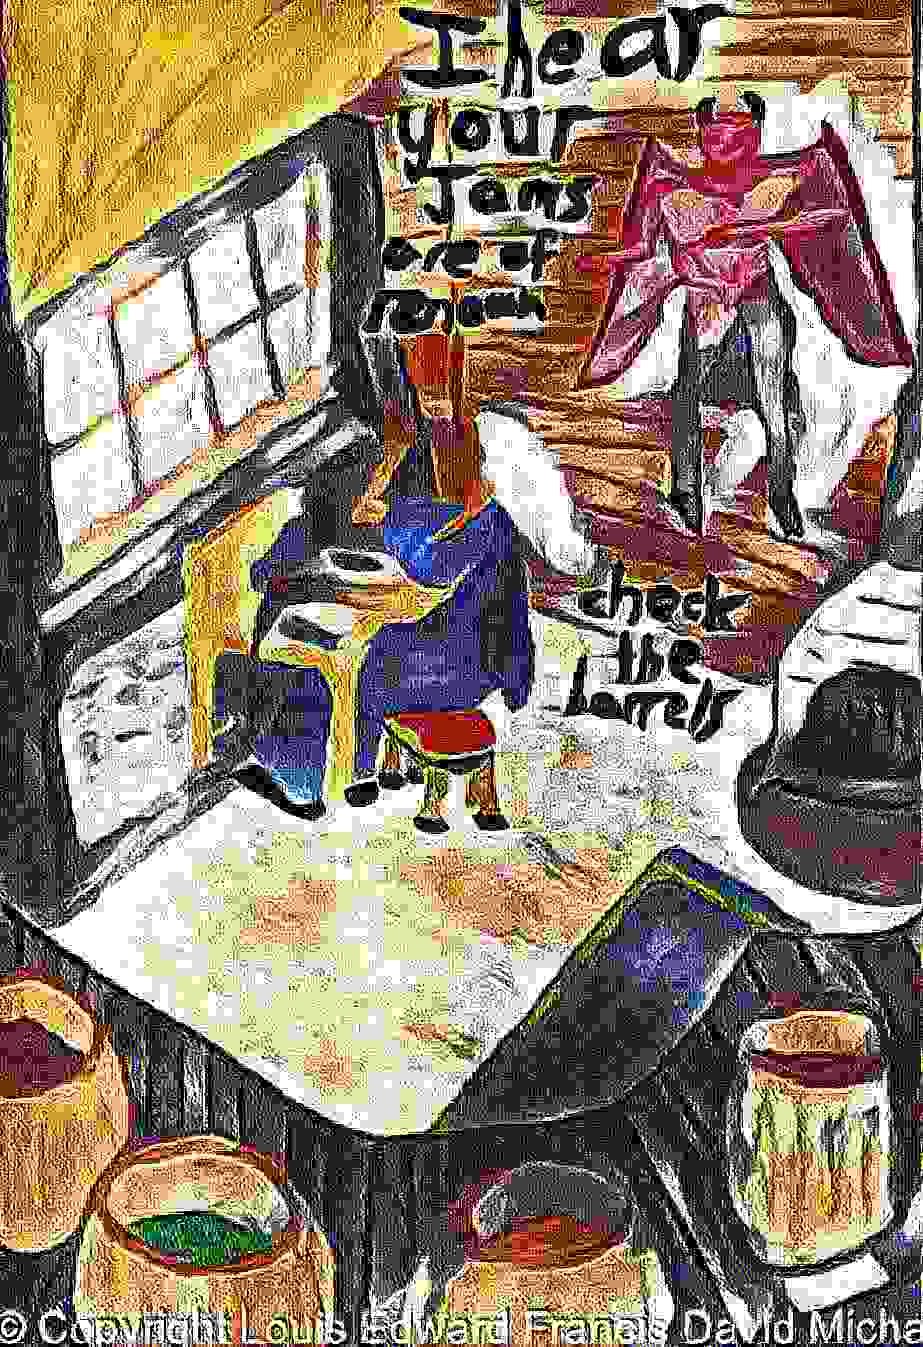 Painting Of The Jam Makers Proposal In Drawn And Digitally R